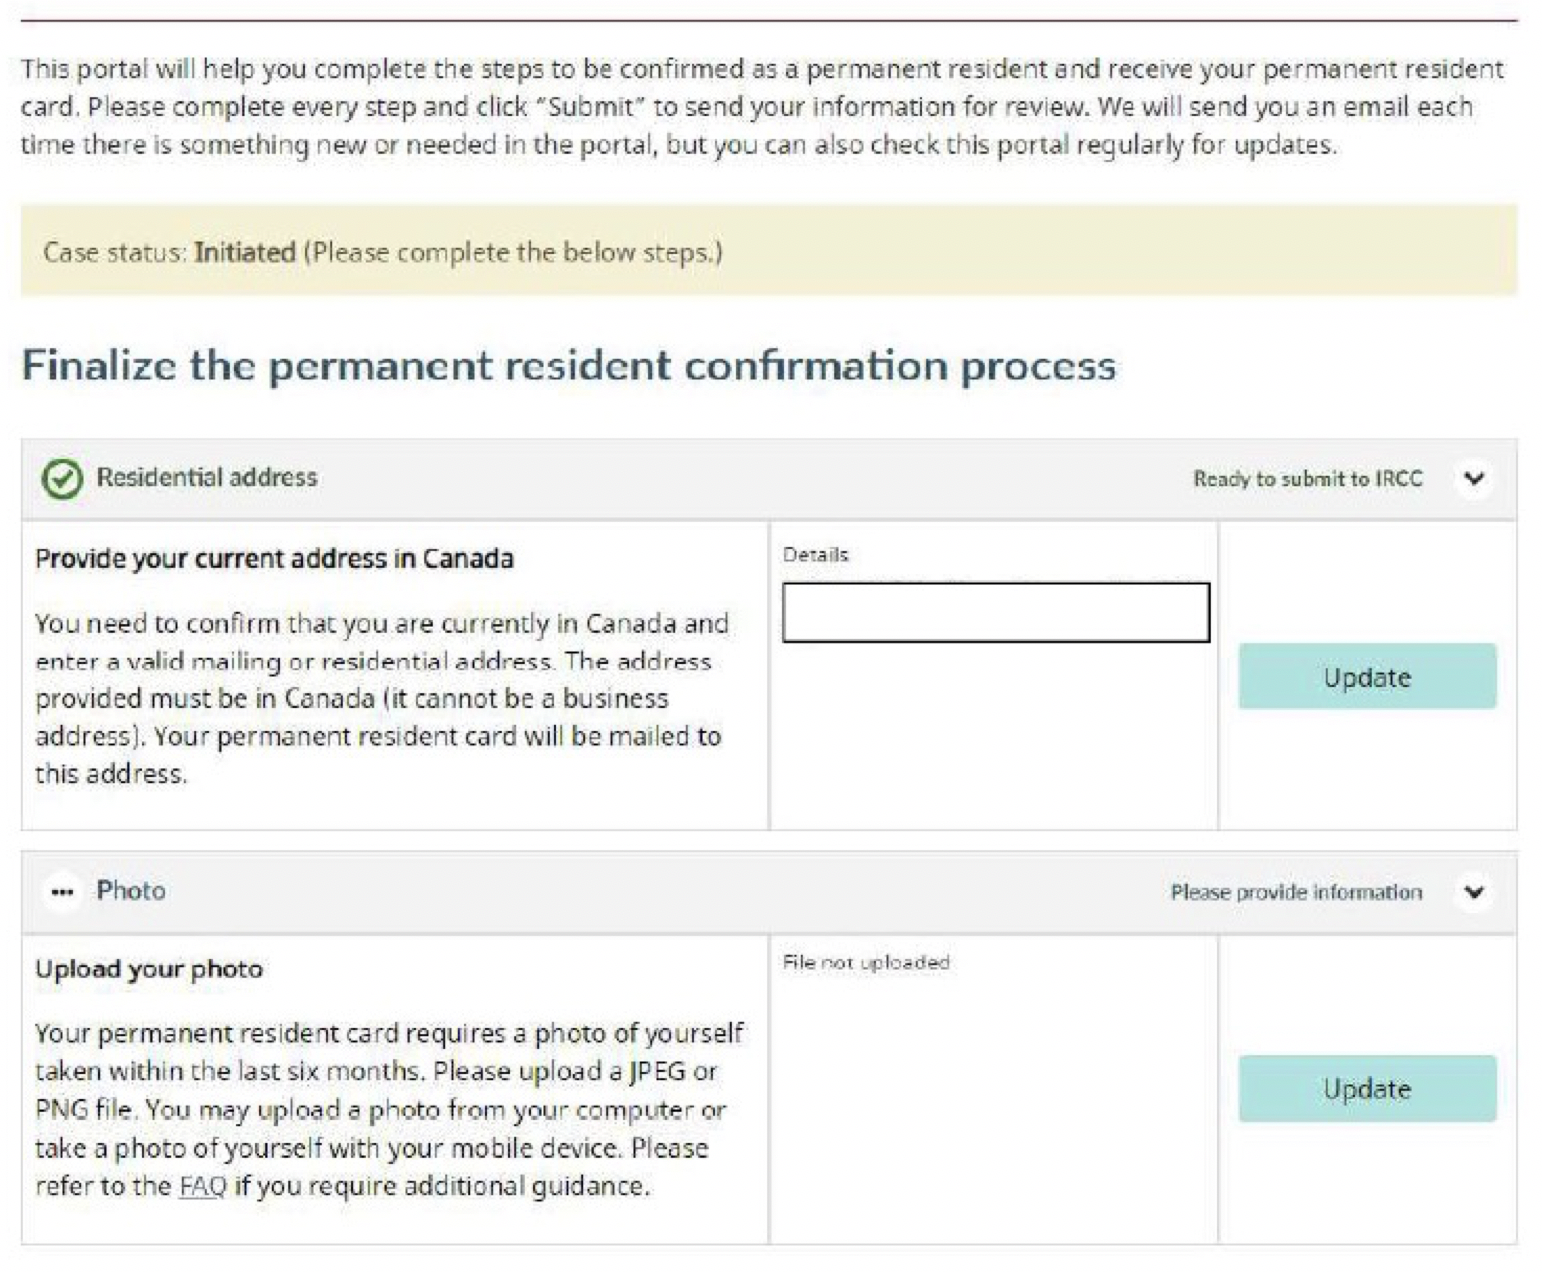 Permanent residence confirmation portal